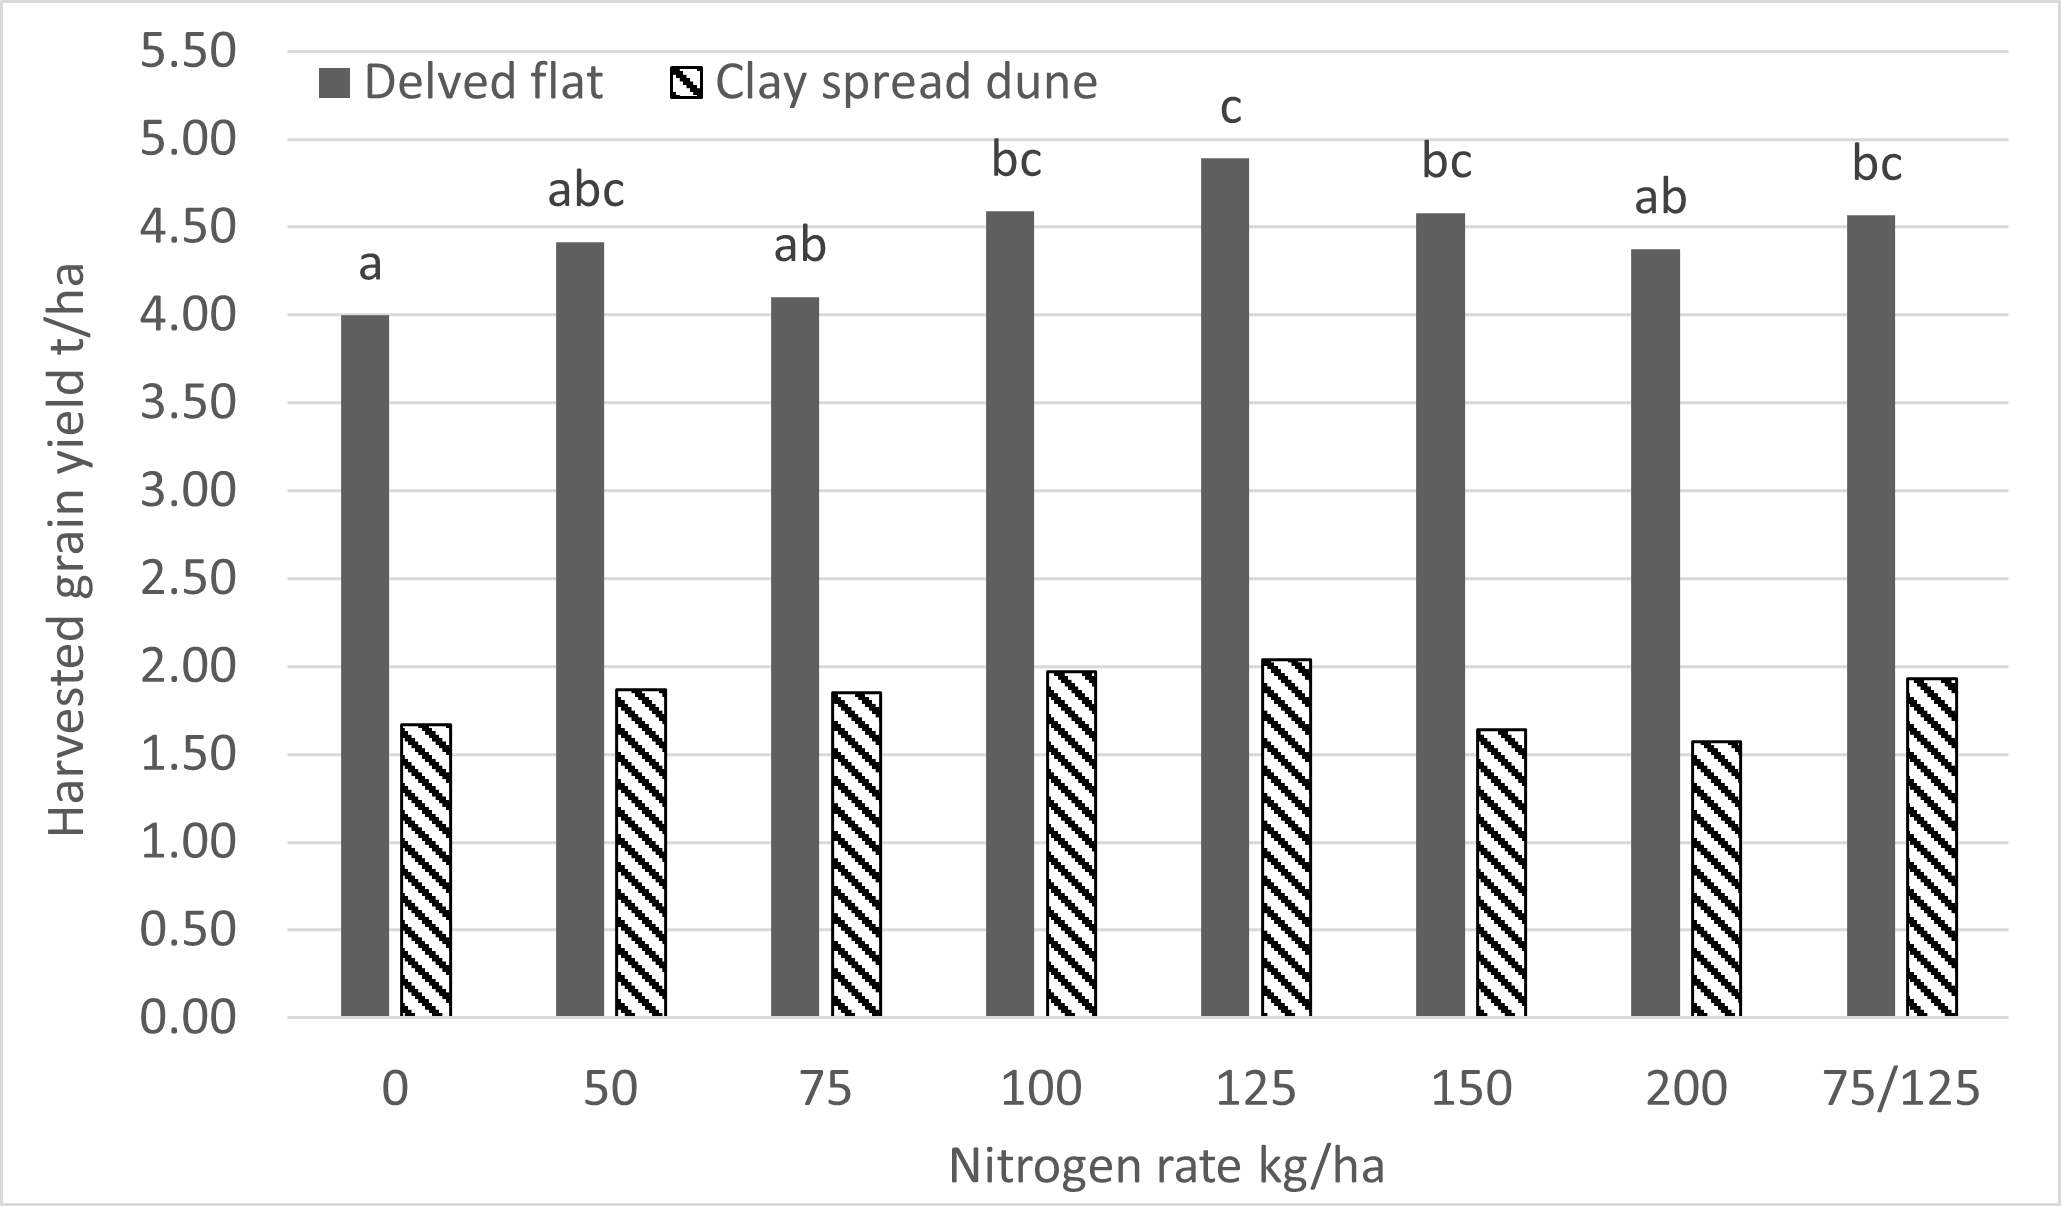 Wheat grain yield (t/ha) at Sherwood in 2023 in response to increasing rates of nitrogen fertiliser. Solid columns = delved flat; dashed columns = clay spread dune (not significant). Letters denote significance (p<0.05, Lsd=0.5).